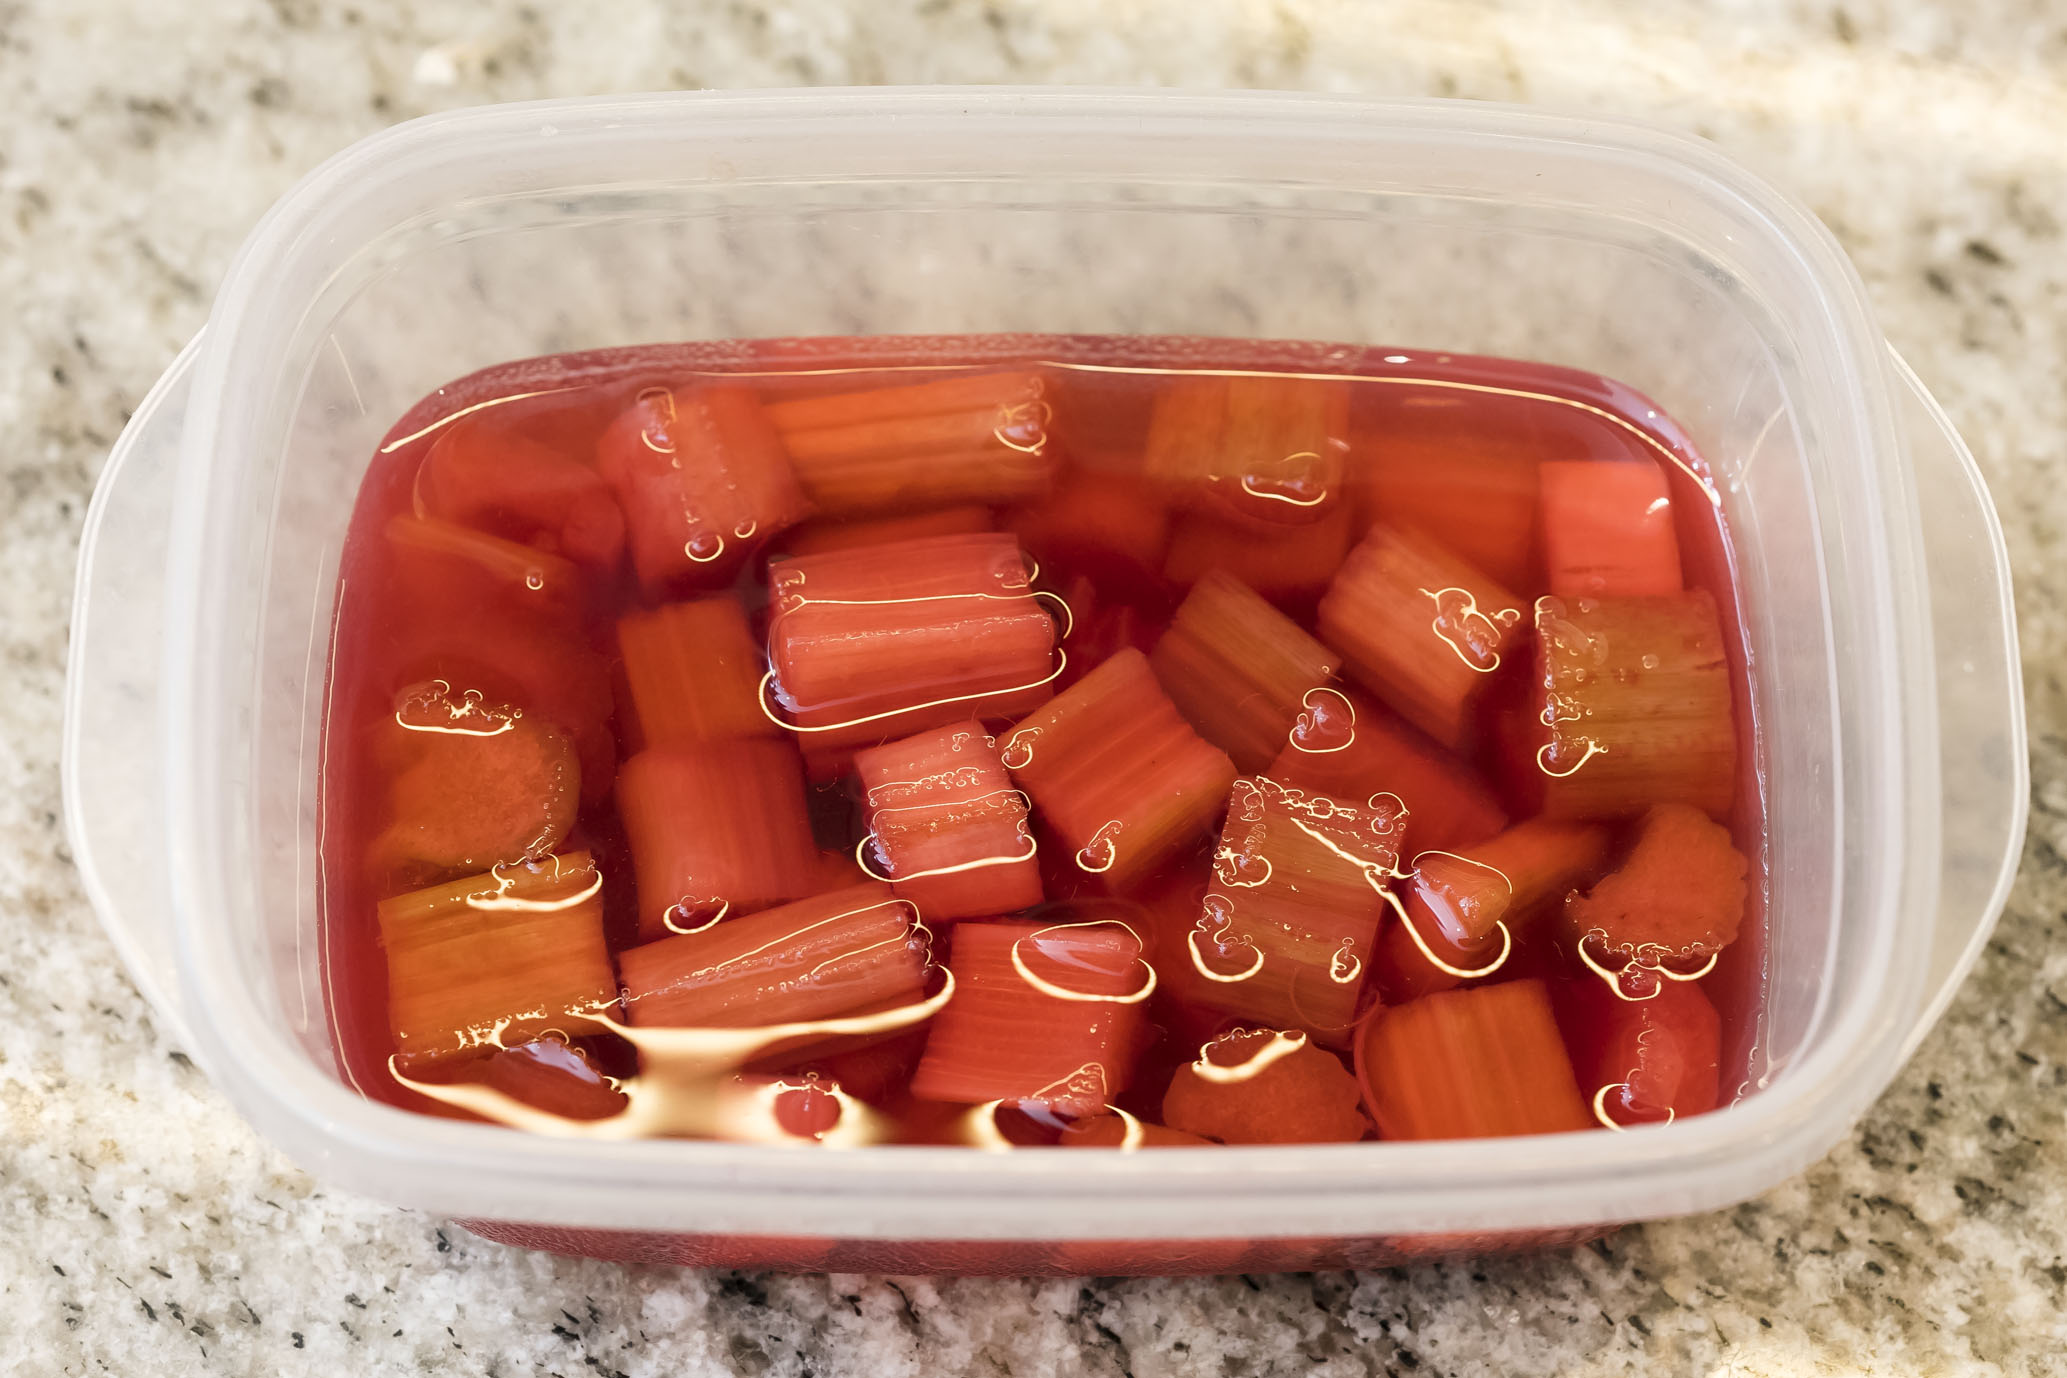 Vibrant colored rhubarb compote